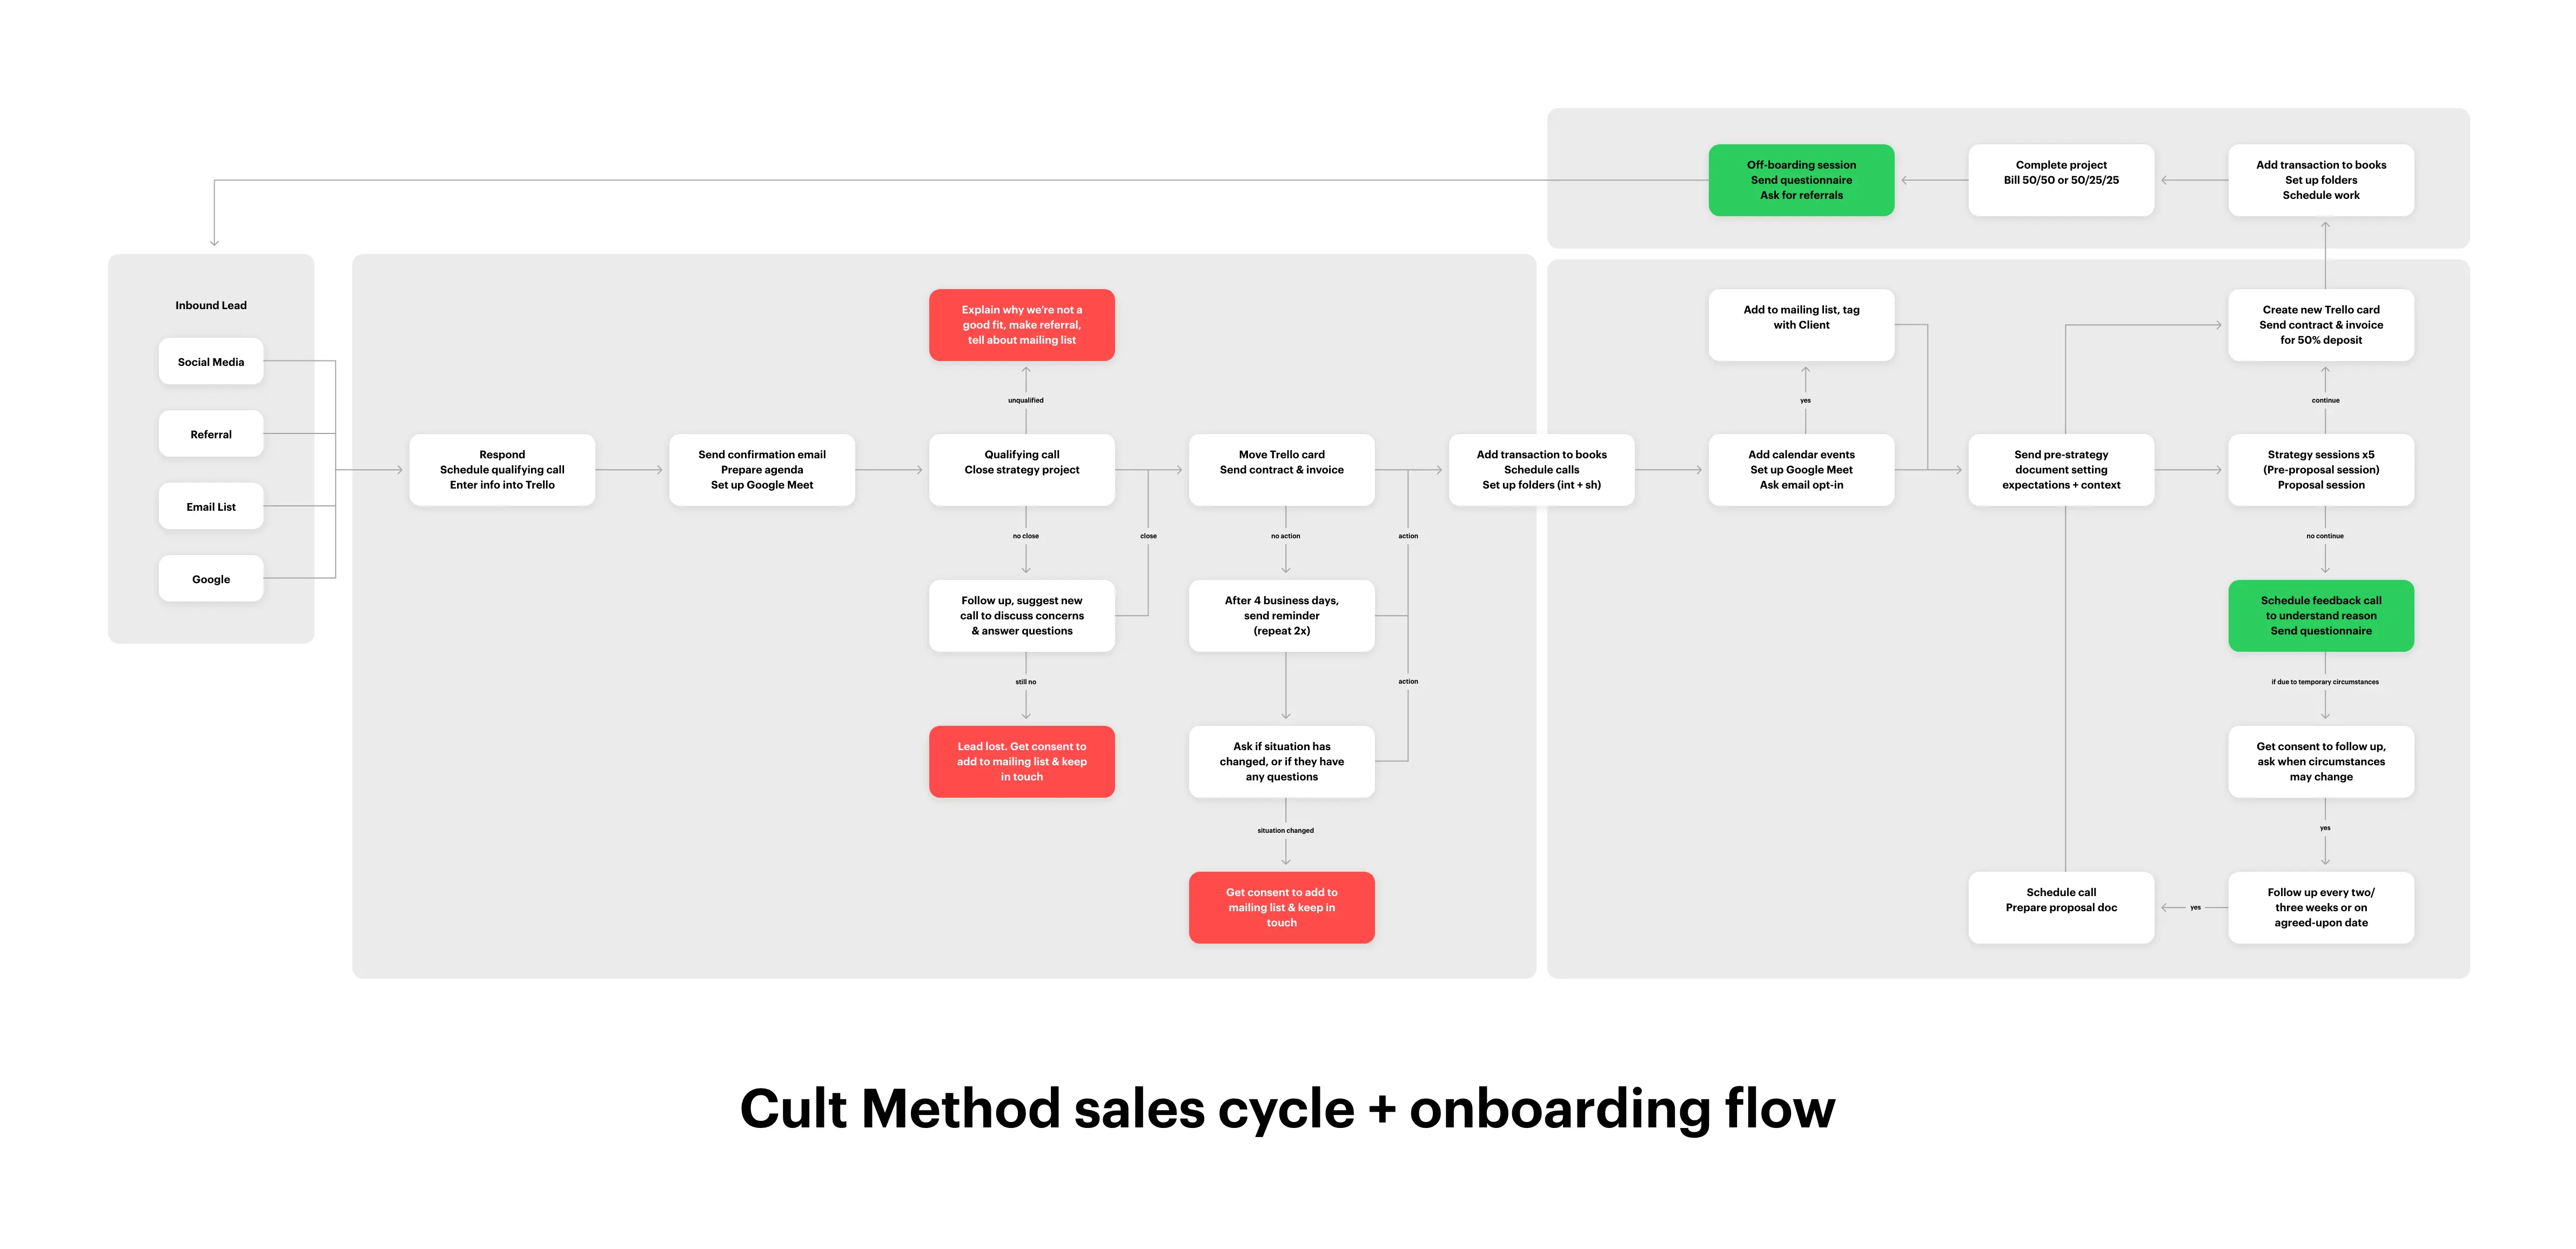 High-definition sales and onboarding flowchart